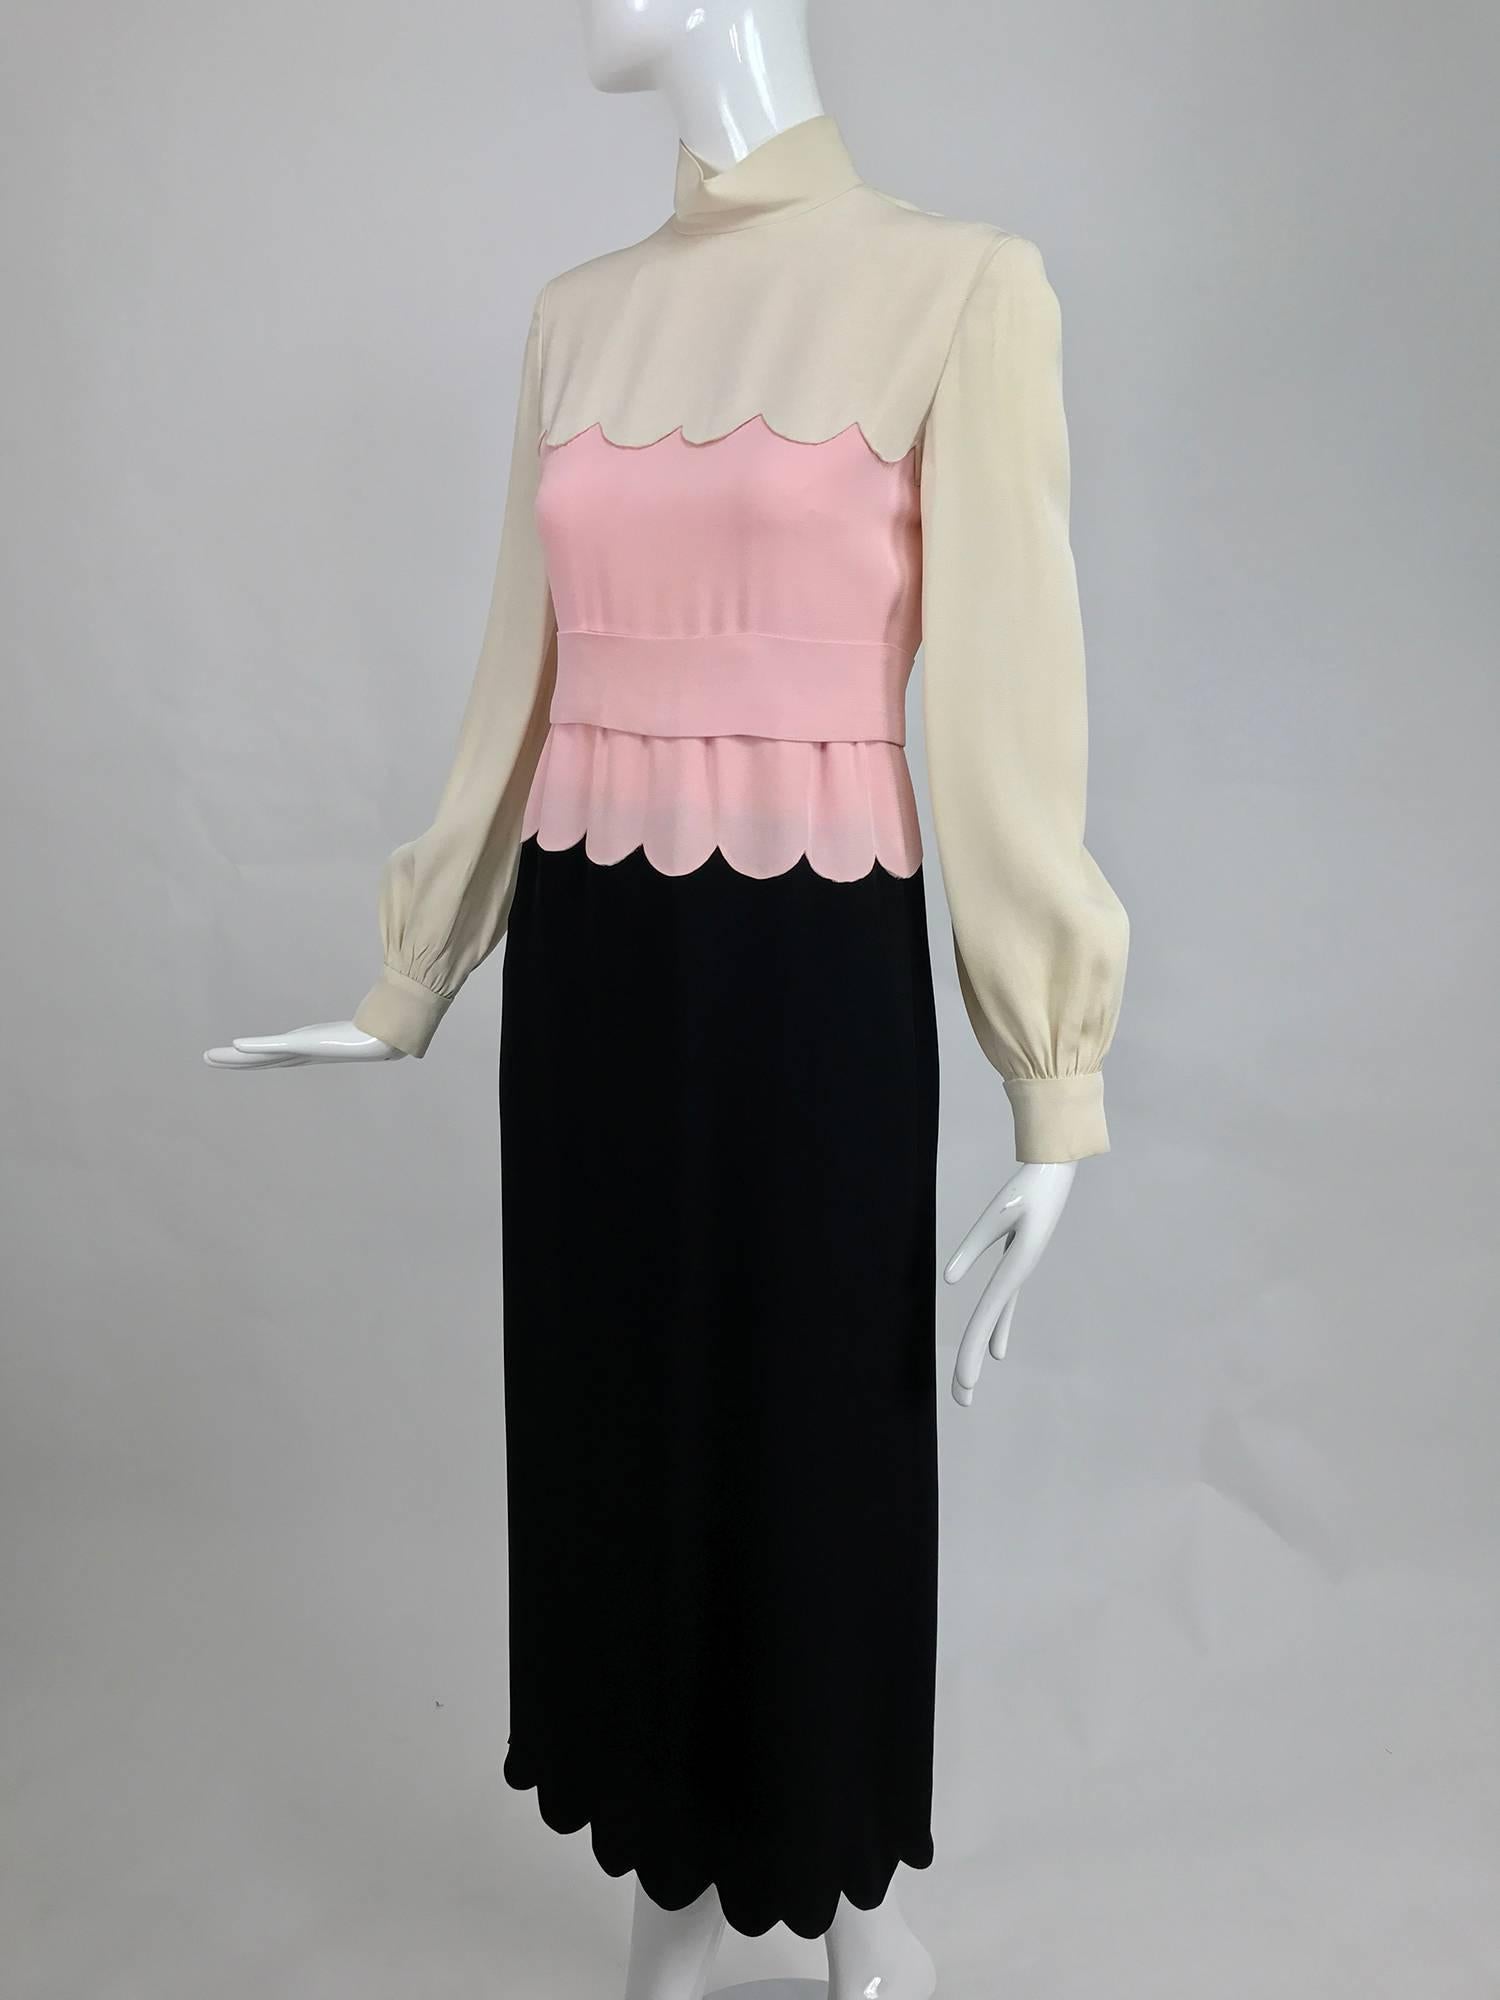 Donald Brooks scalloped crepe dress in cream pink and black from the 1960s...This beautiful little dress is artfully constructed with an eye to geometry, without the angles...Precision tailoring and an eye for detail, it is what set Donald Brooks